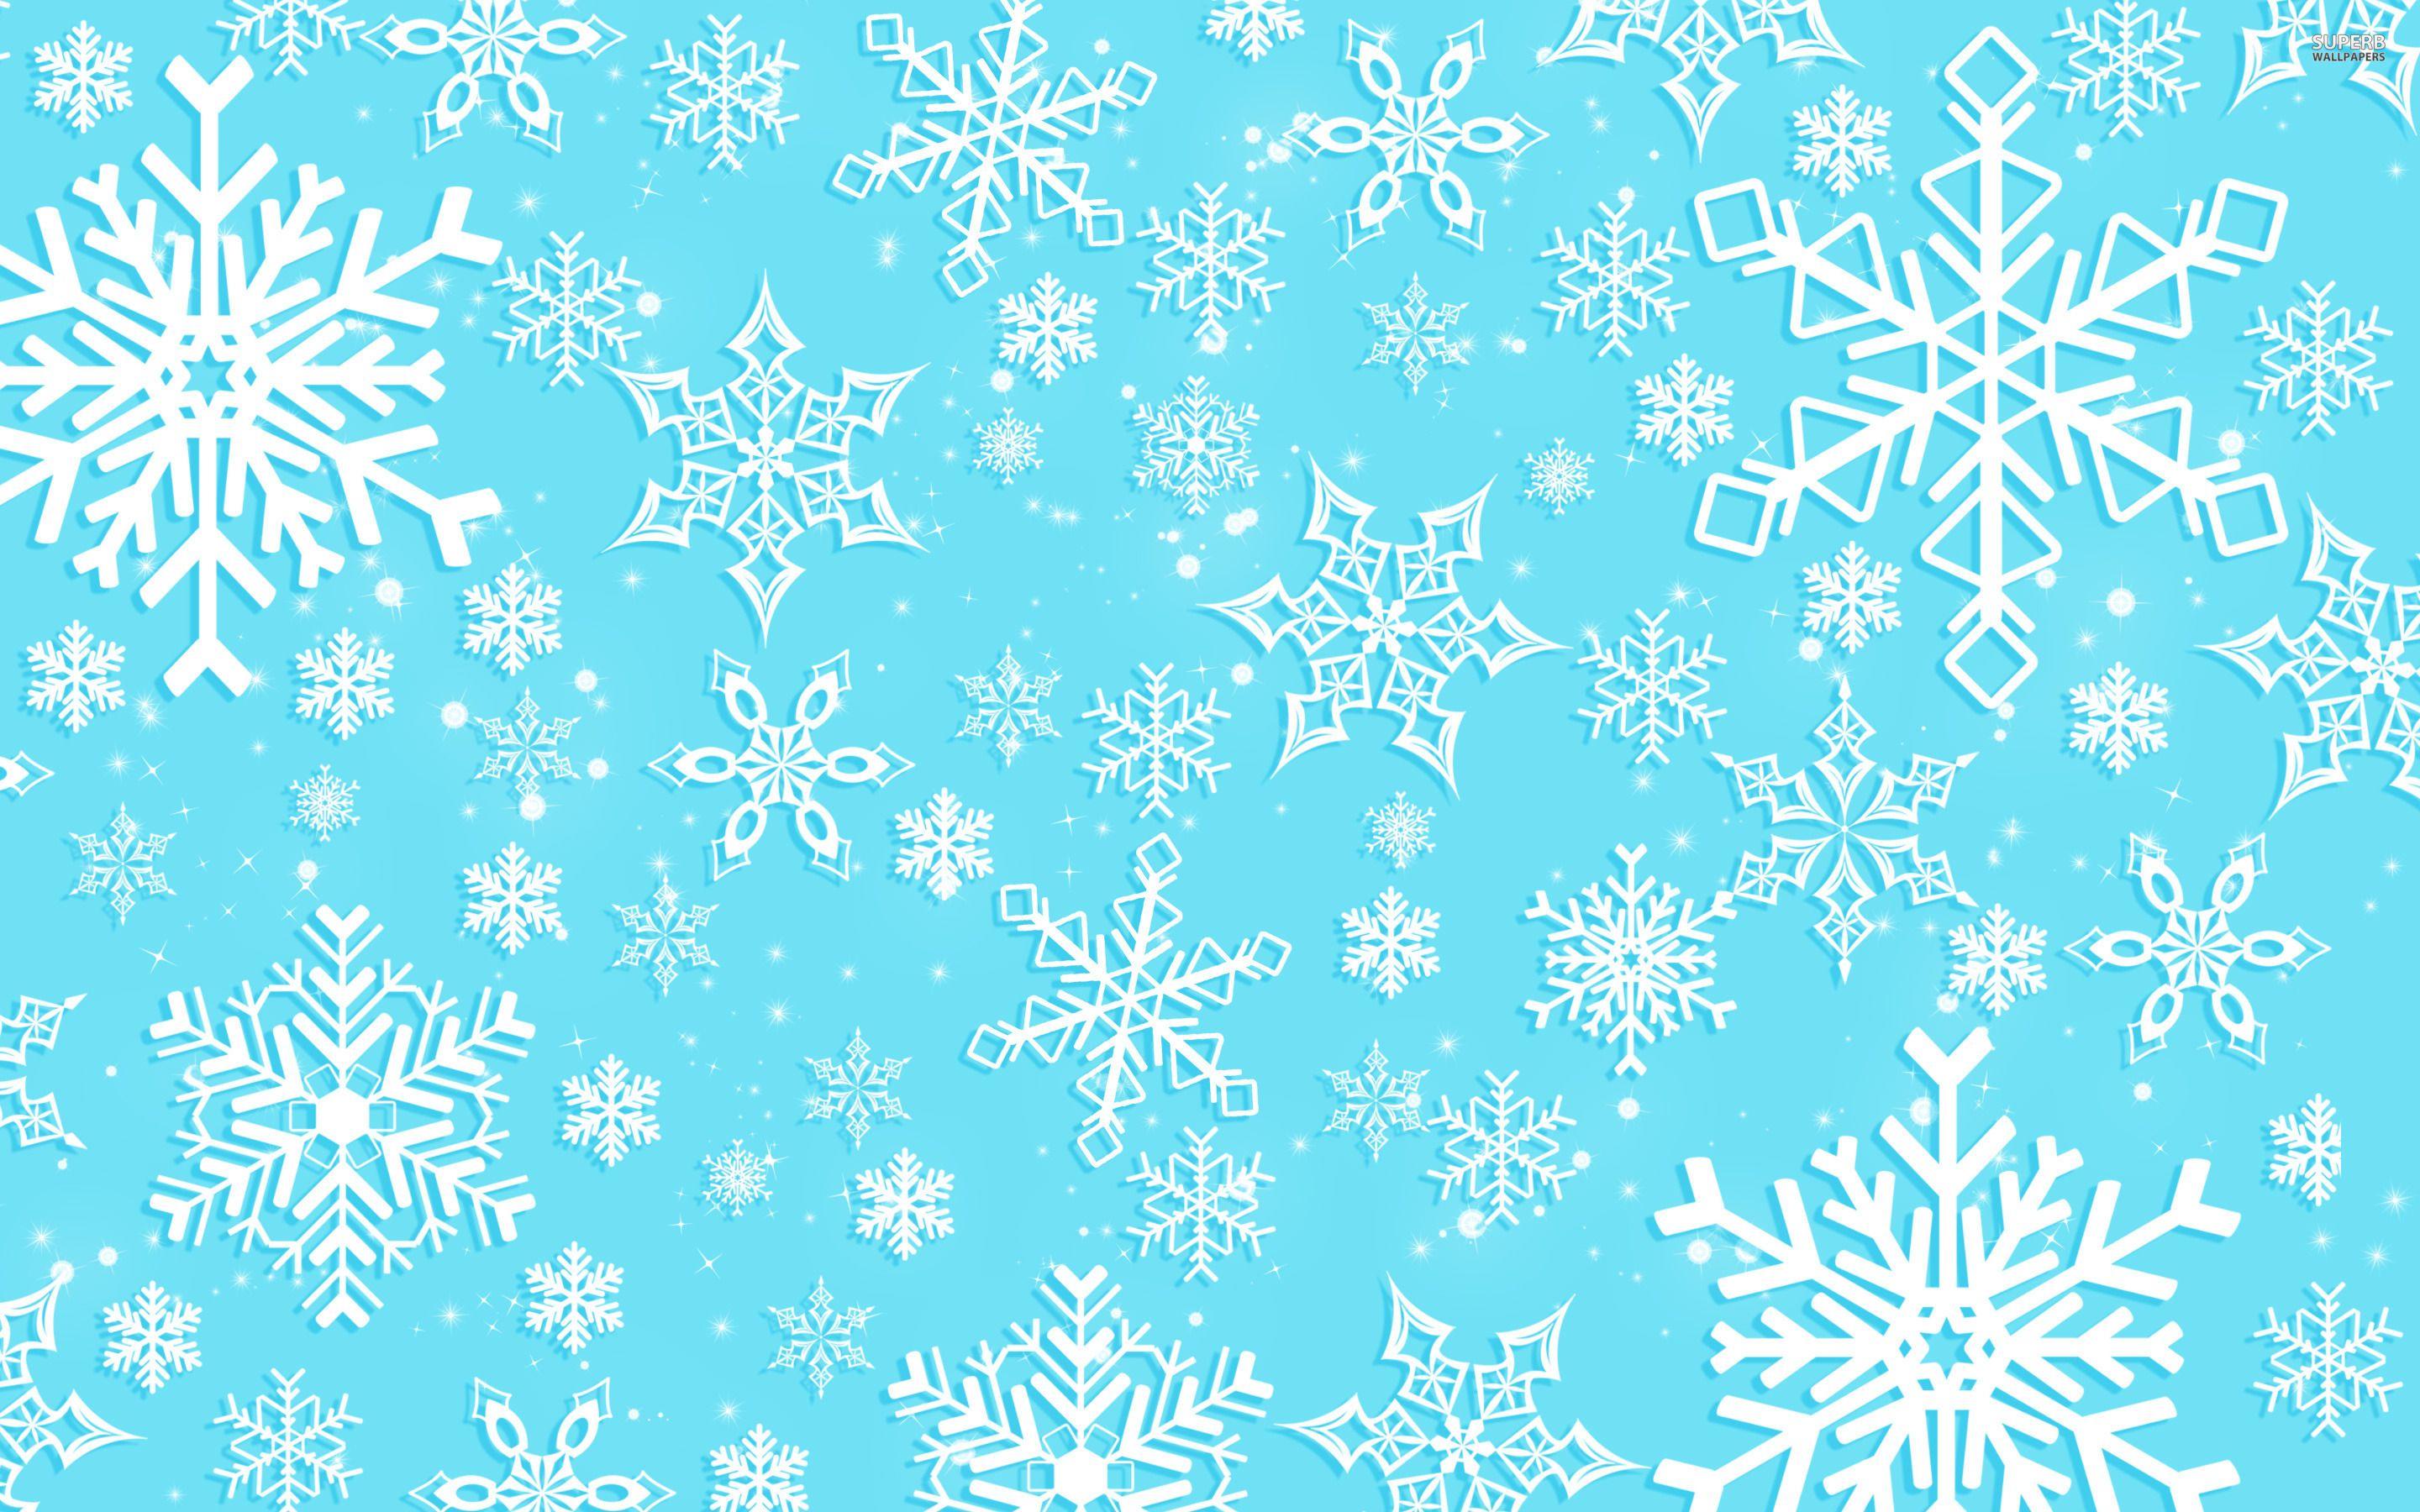 Best 56+ Snowflake Backgrounds on HipWallpapers